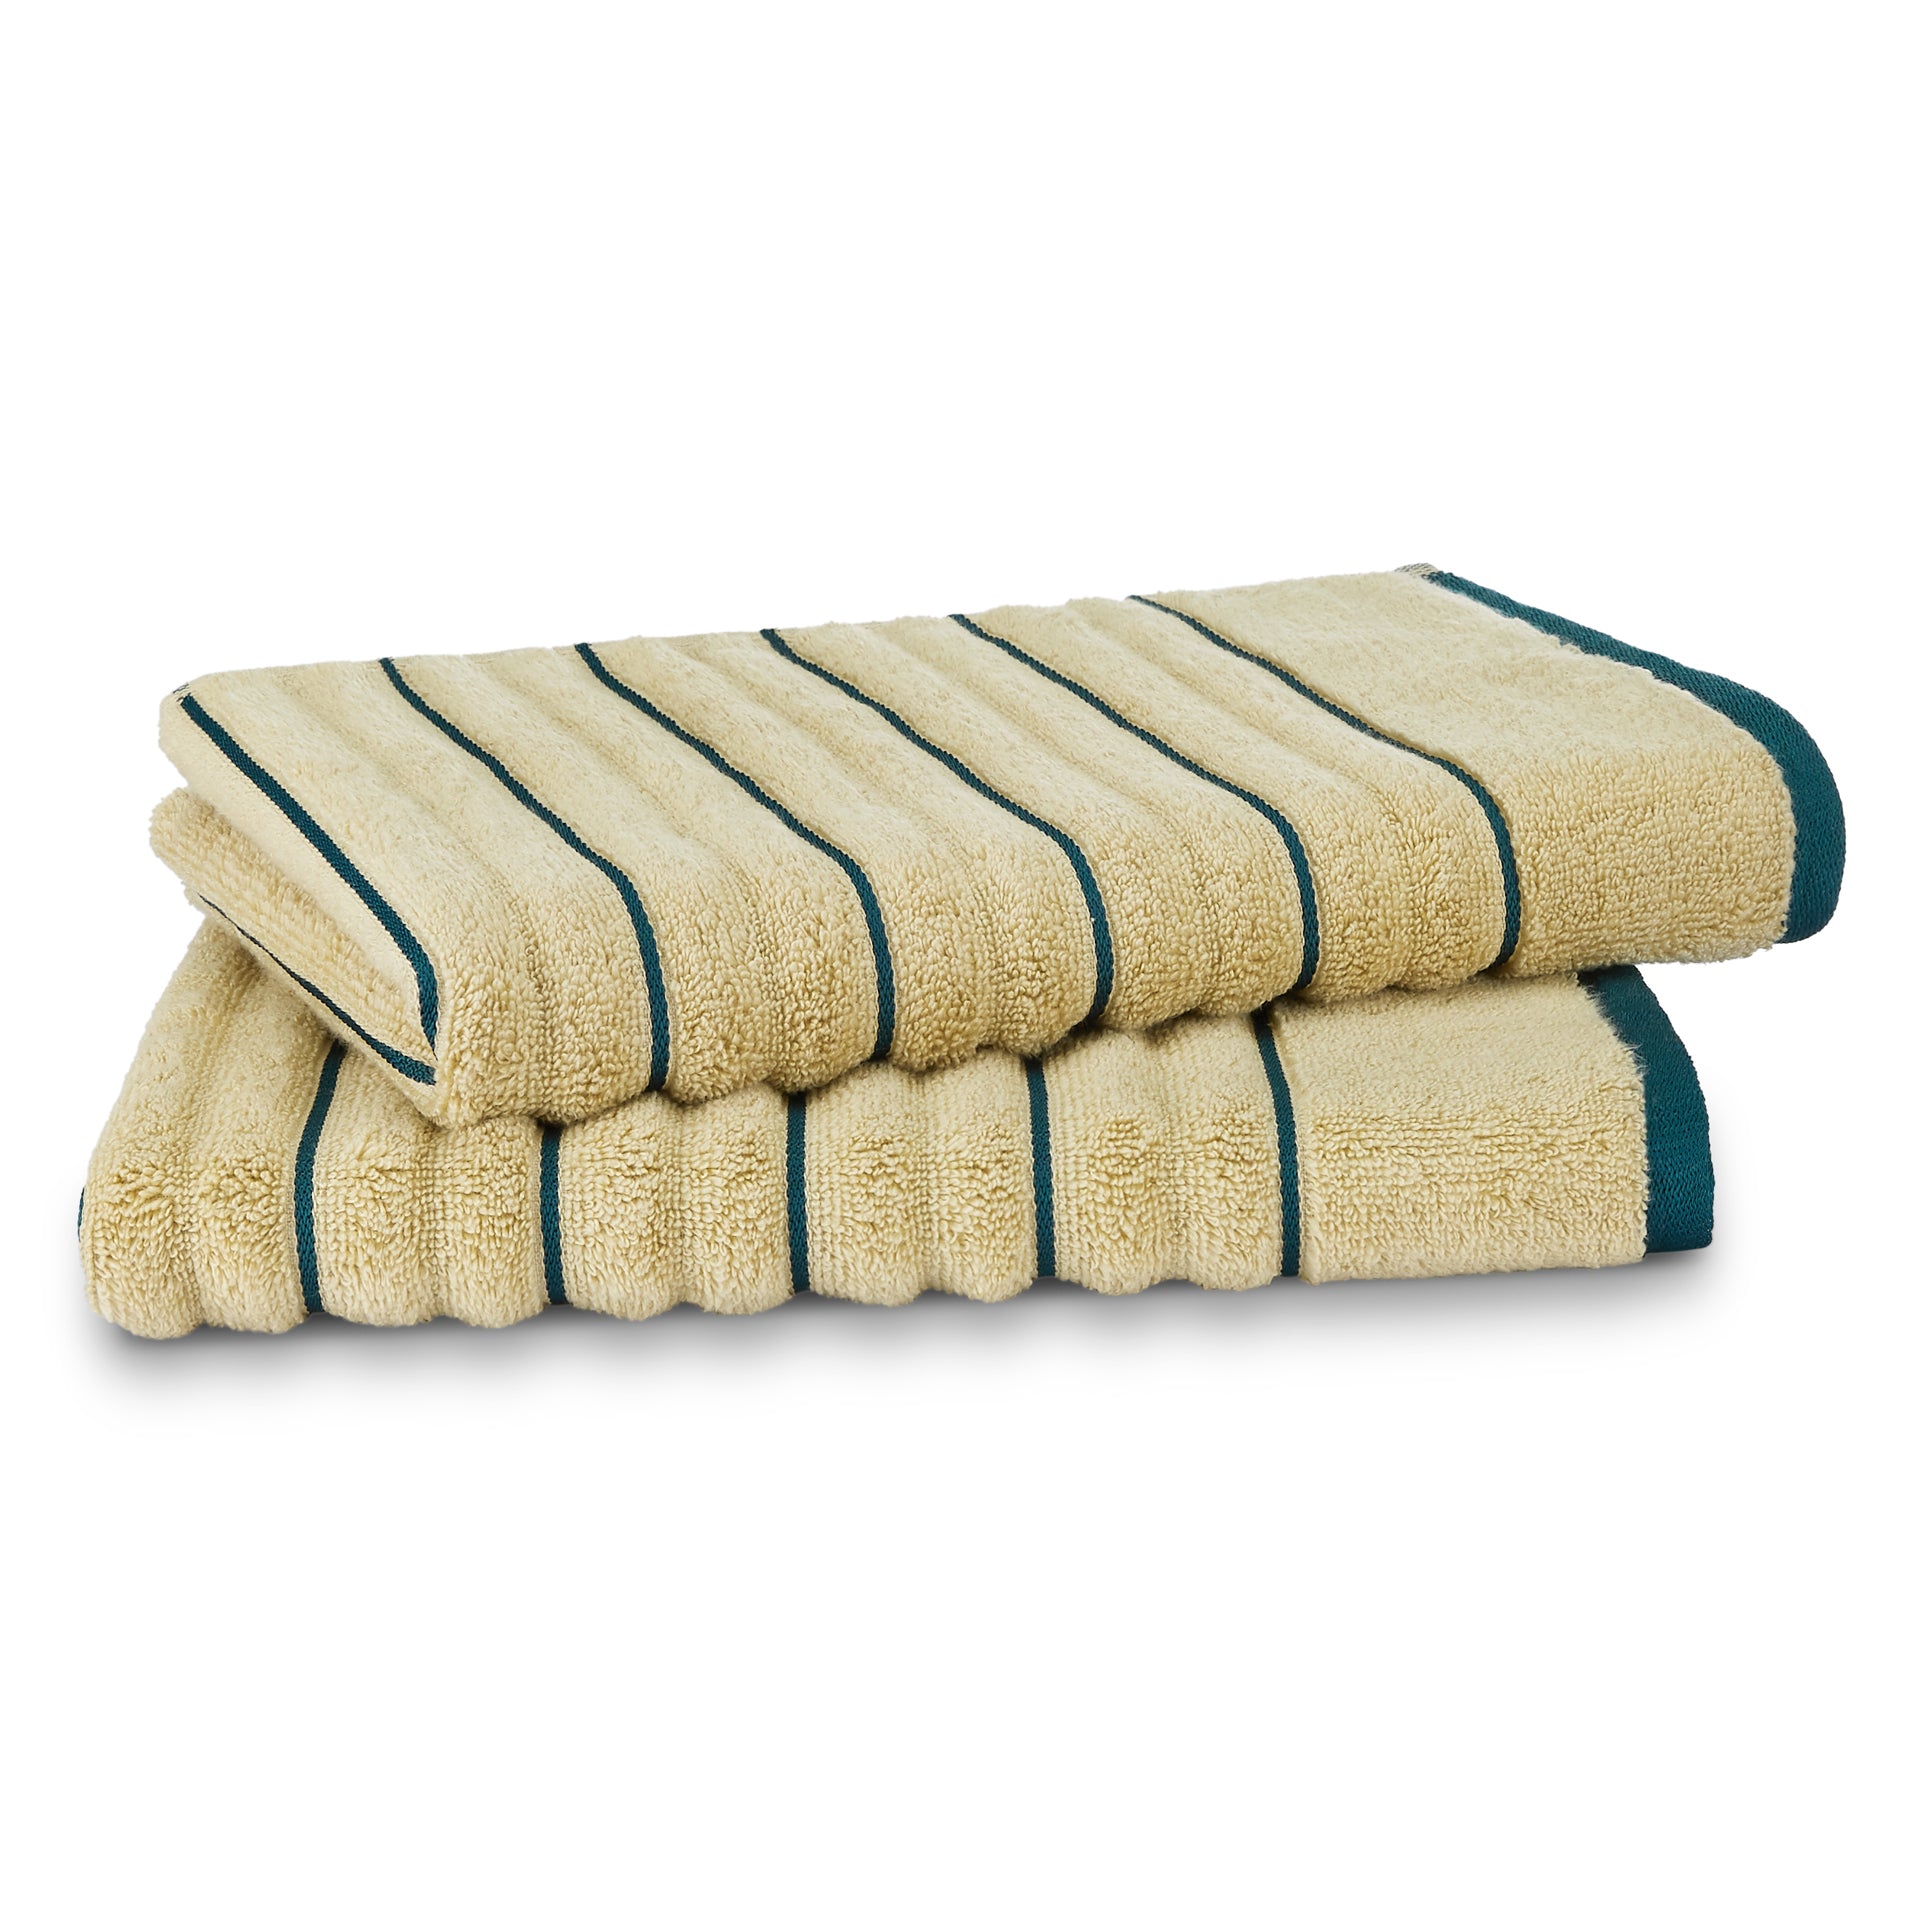 Spaces Exotica Ribbed Small Hand Towel 575 GSM(Desert Teal)